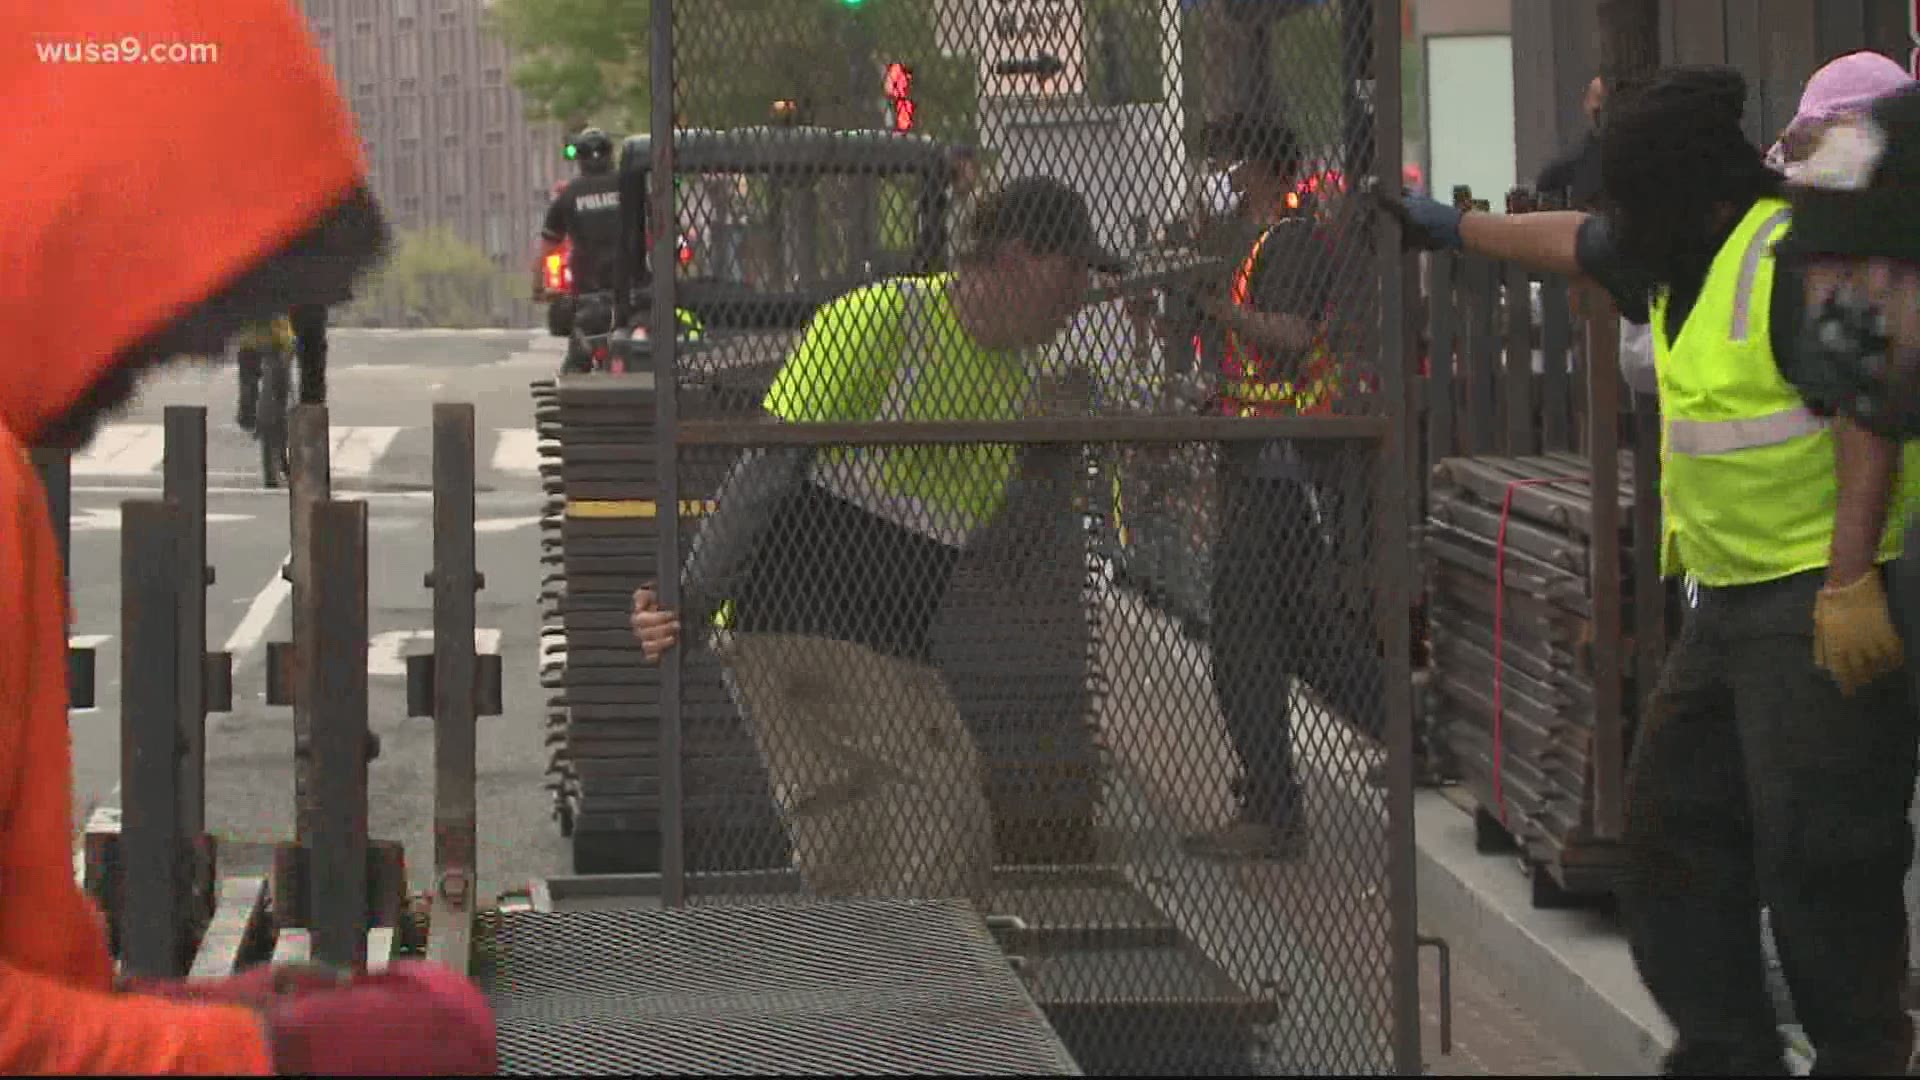 Some of the fencing is still in place. The Secret Service will determine when all of the barriers will be removed.